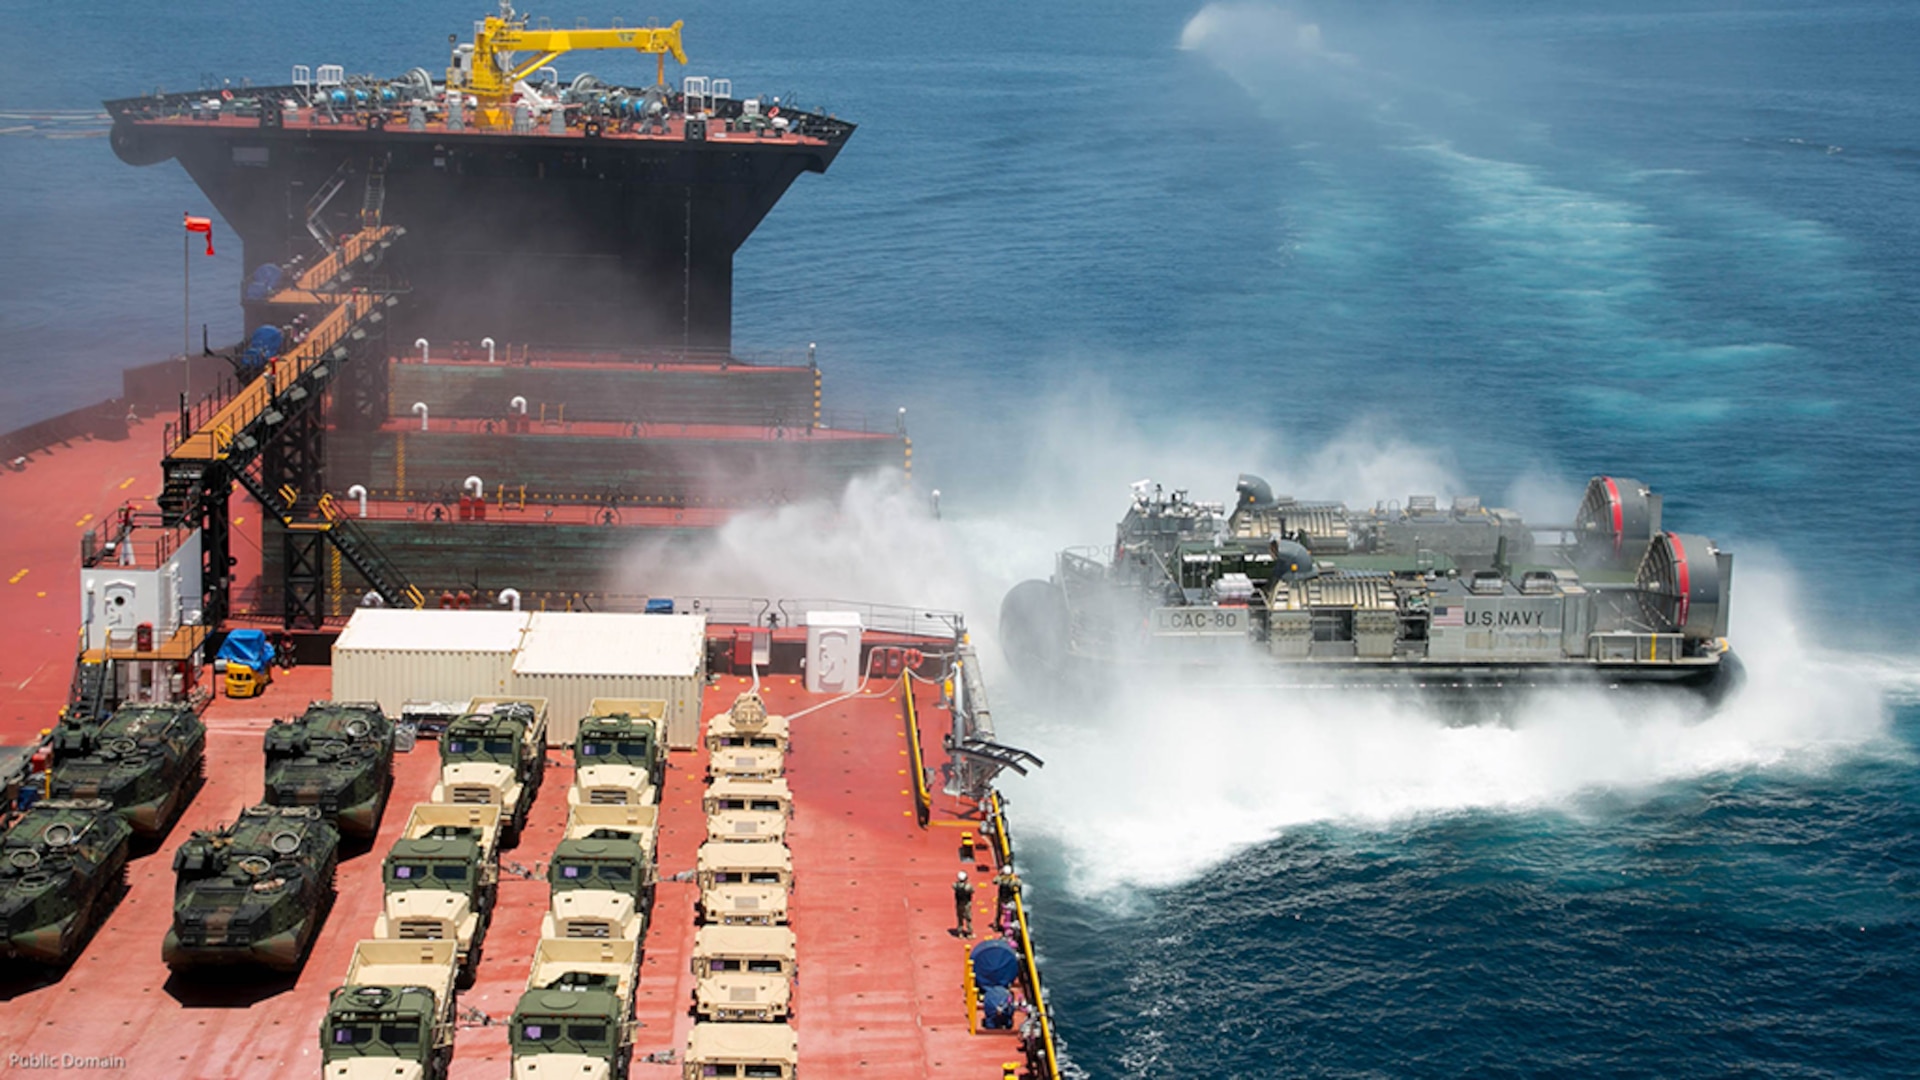 Senior U.S. and foreign military leaders, not shown, observe a Landing Craft Air Cushion (LCAC) disembark the USNS John Glenn during an amphibious assault demonstration during the USPACOM Amphibious Leaders Symposium (PALS) at sea off the coast of U.S. Marine Corps Base Camp Pendleton, Calif., July 13, 2016. PALS brings together senior leaders of allied and partner nations from the Indo-Asia Pacific region to discuss key aspects of maritime/amphibious operations, capability development, crisis response, and interoperability. Twenty-two allied and partnered nations, including the U.S. are participating. 